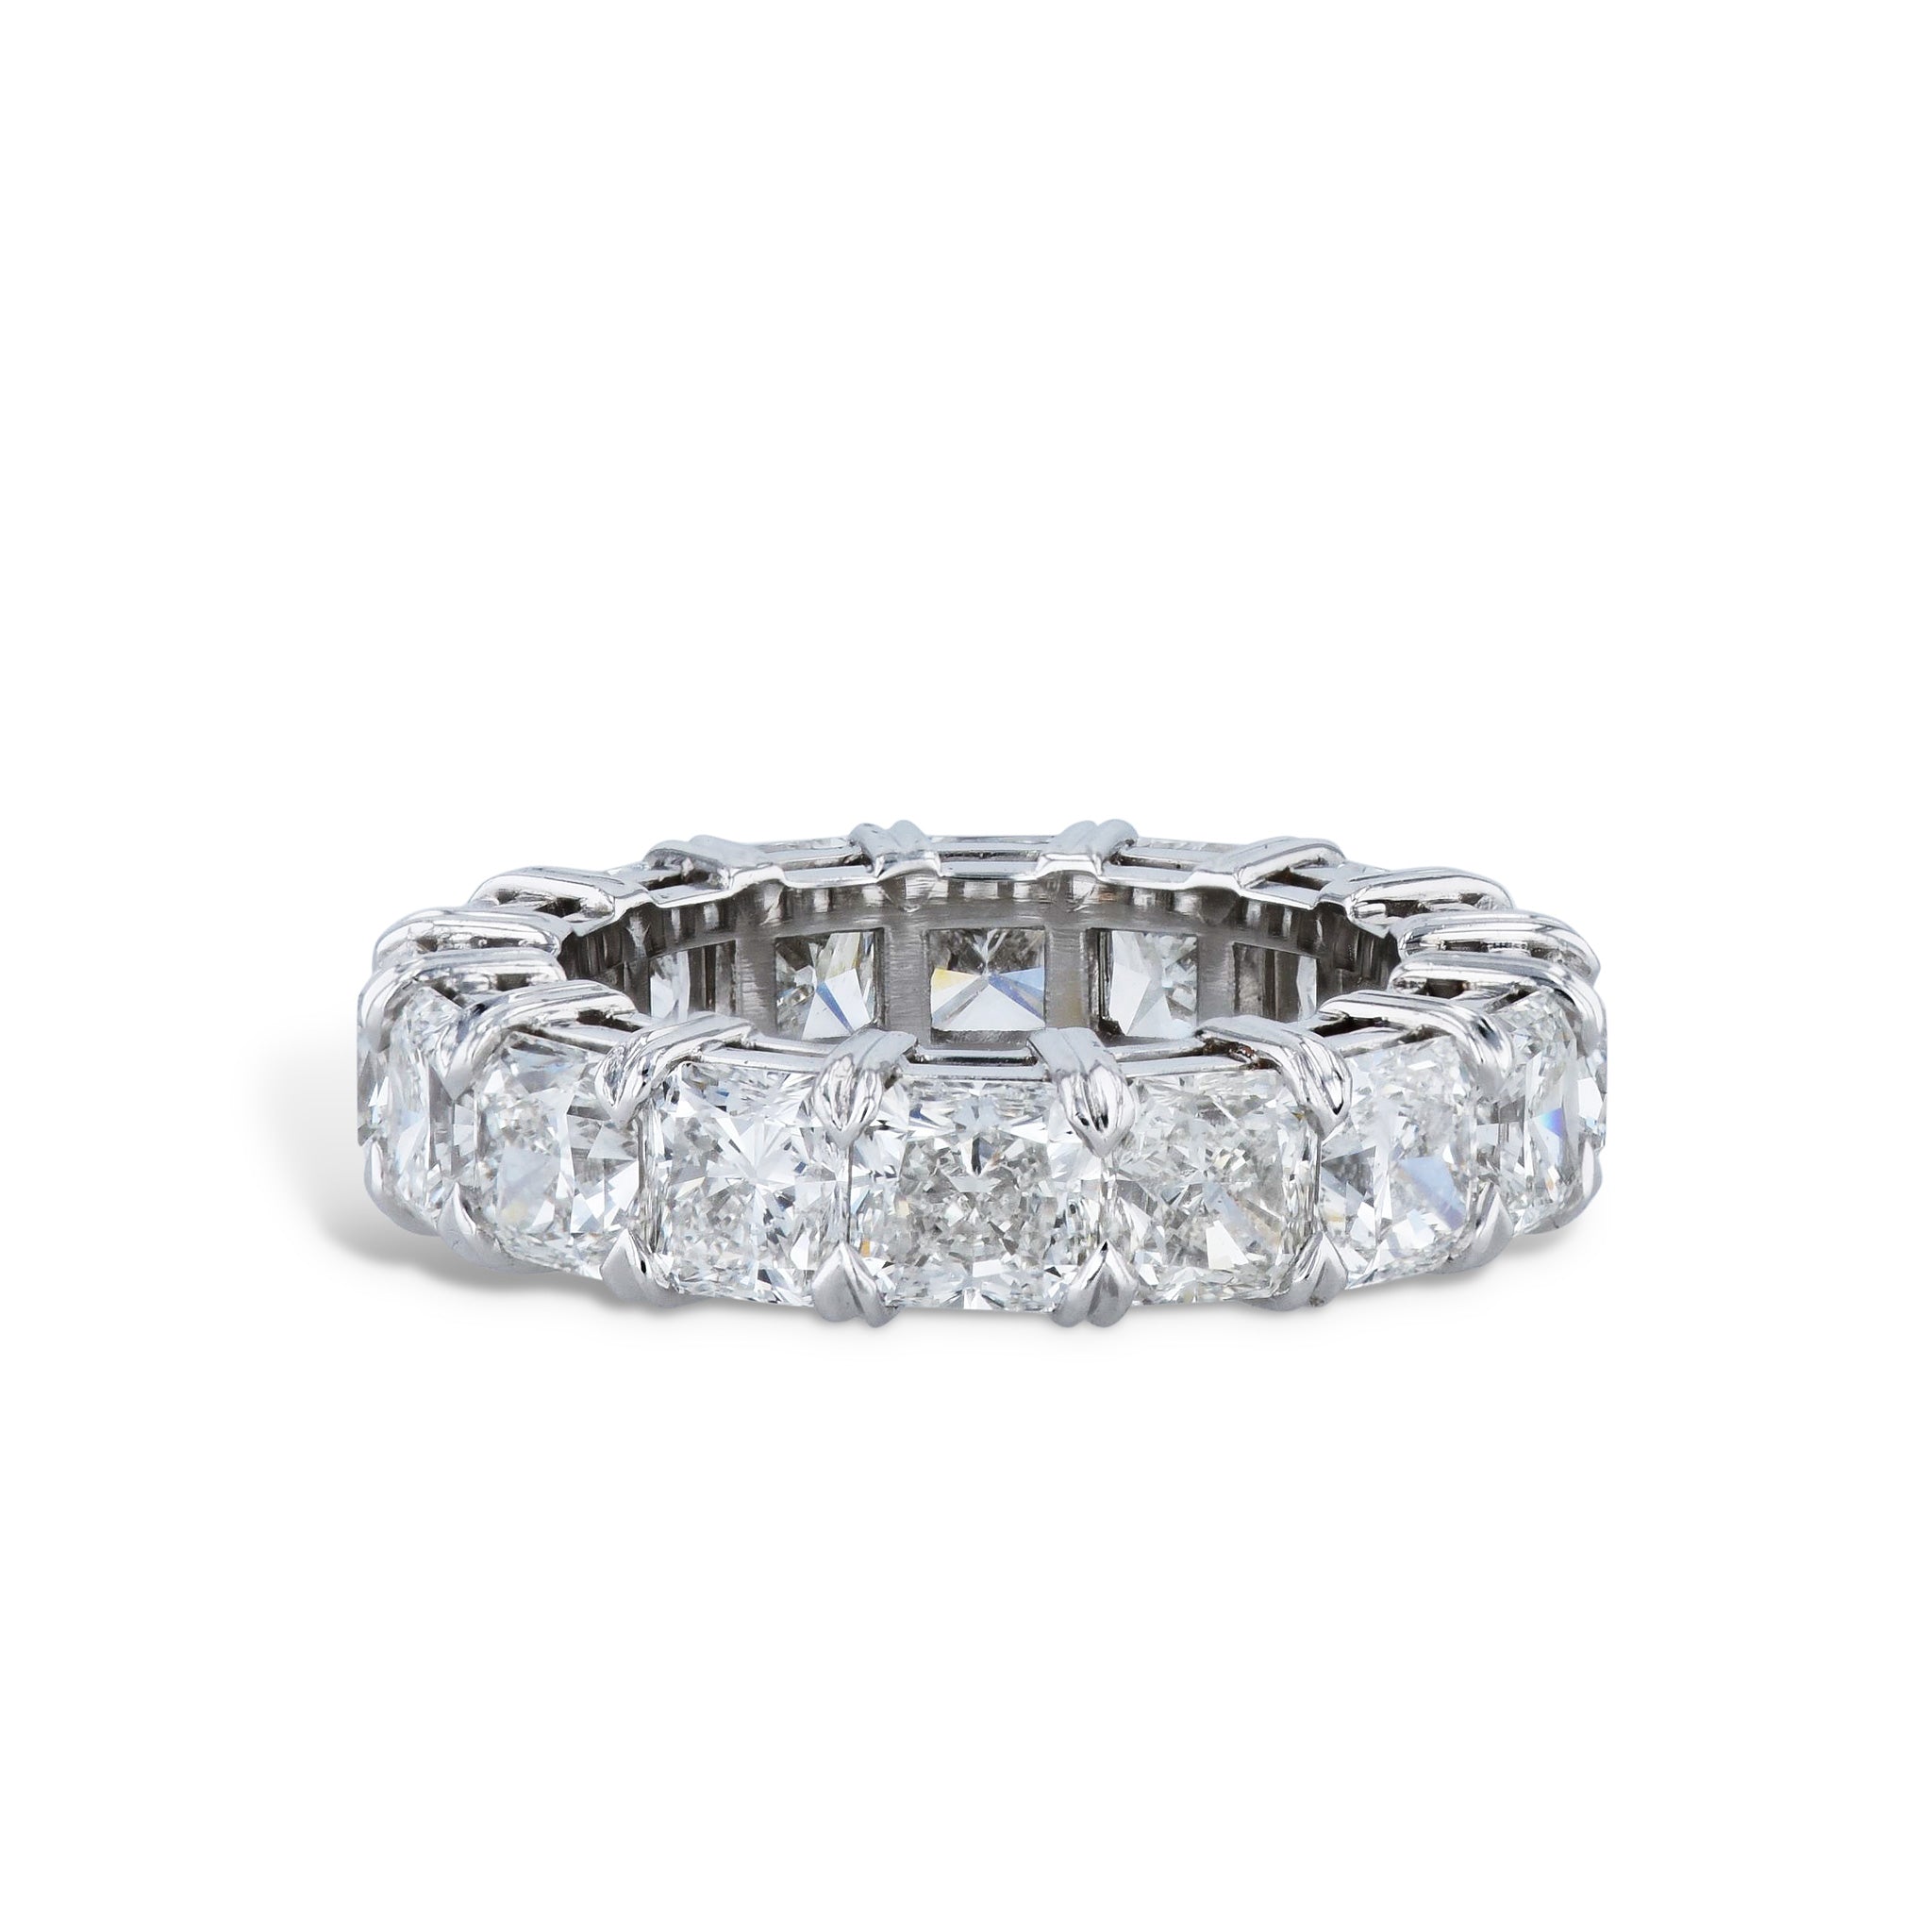 Radiant Cut Diamond Platinum Eternity Band Ring Rings Curated by H